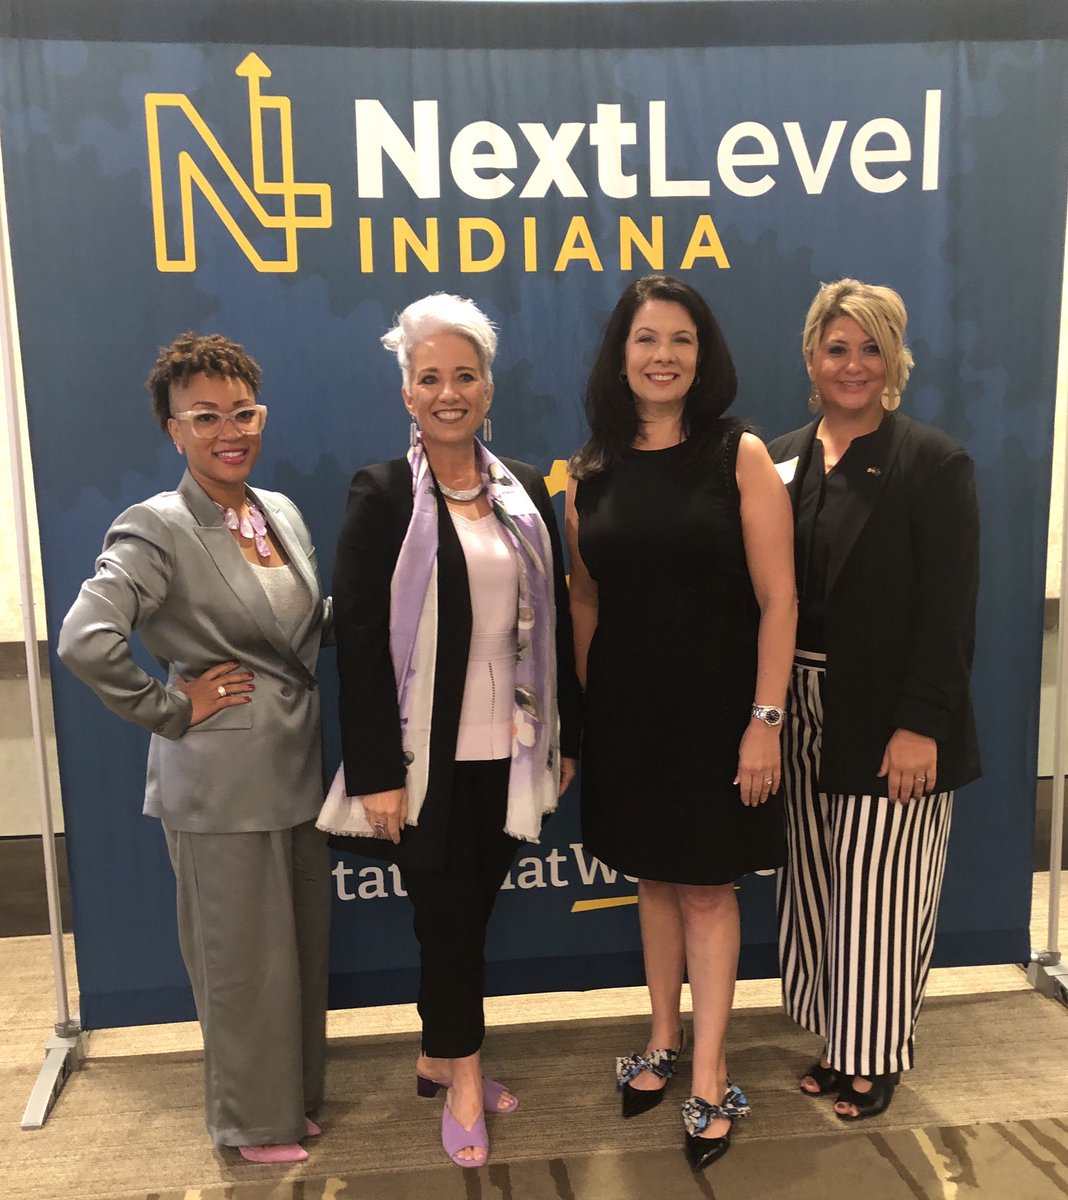 Proud to attend and be a part of today’s event! Such an inspiring panel discussion with these #ladyleaders! @Indiana_EDC #WomenINBusiness